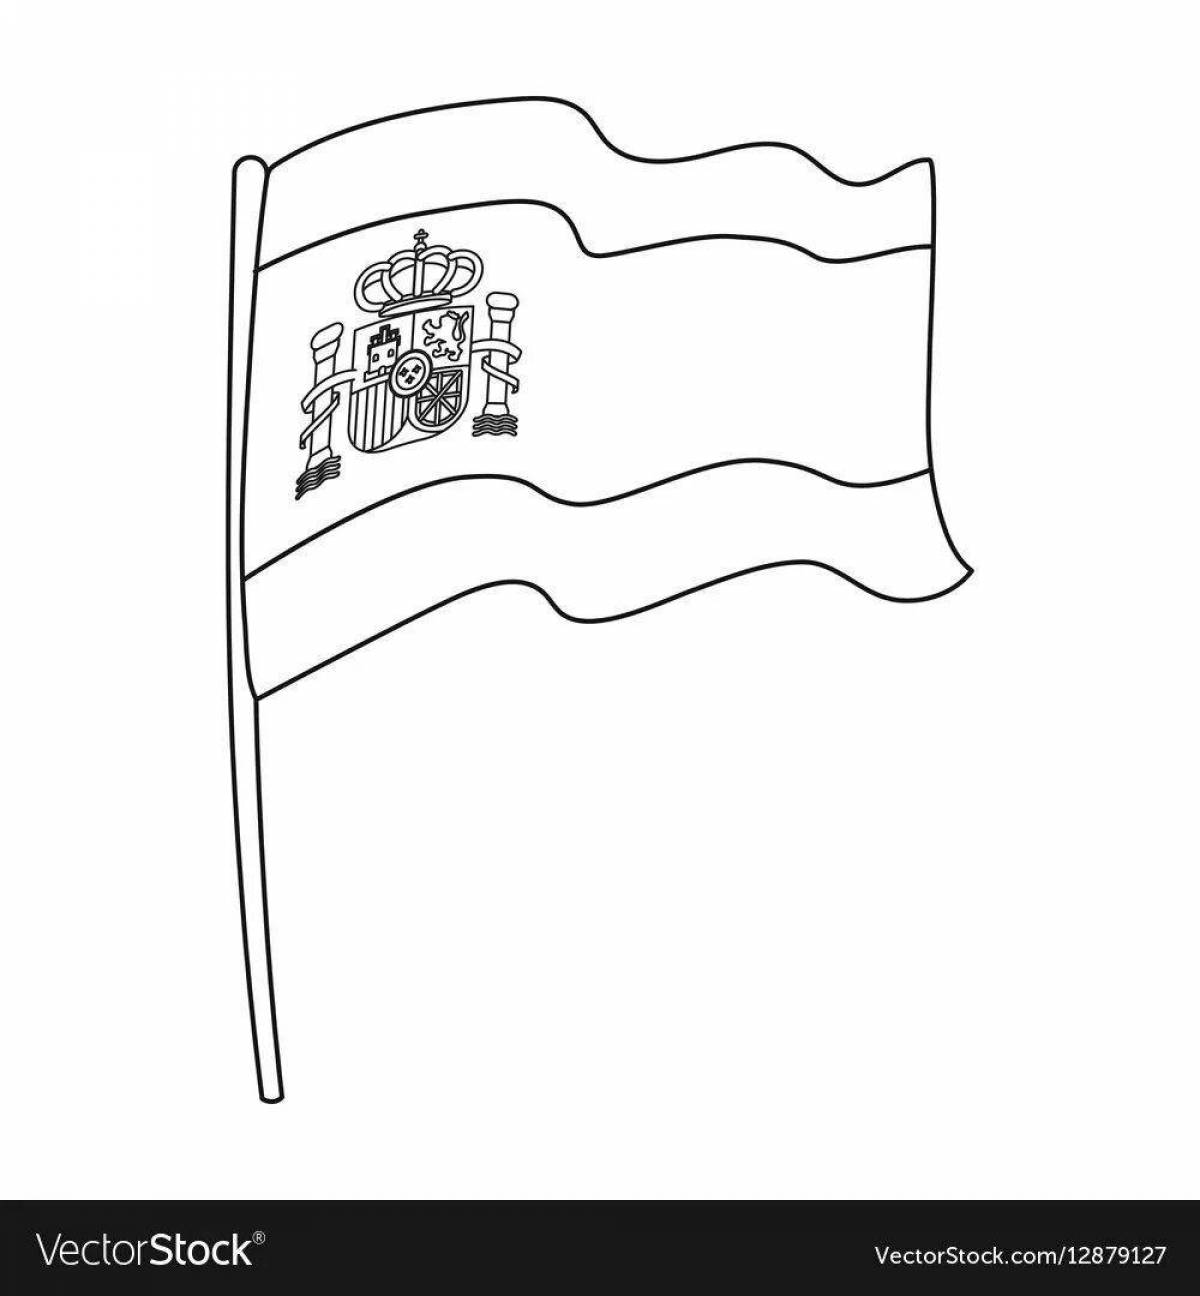 Greater Spain flag coloring page